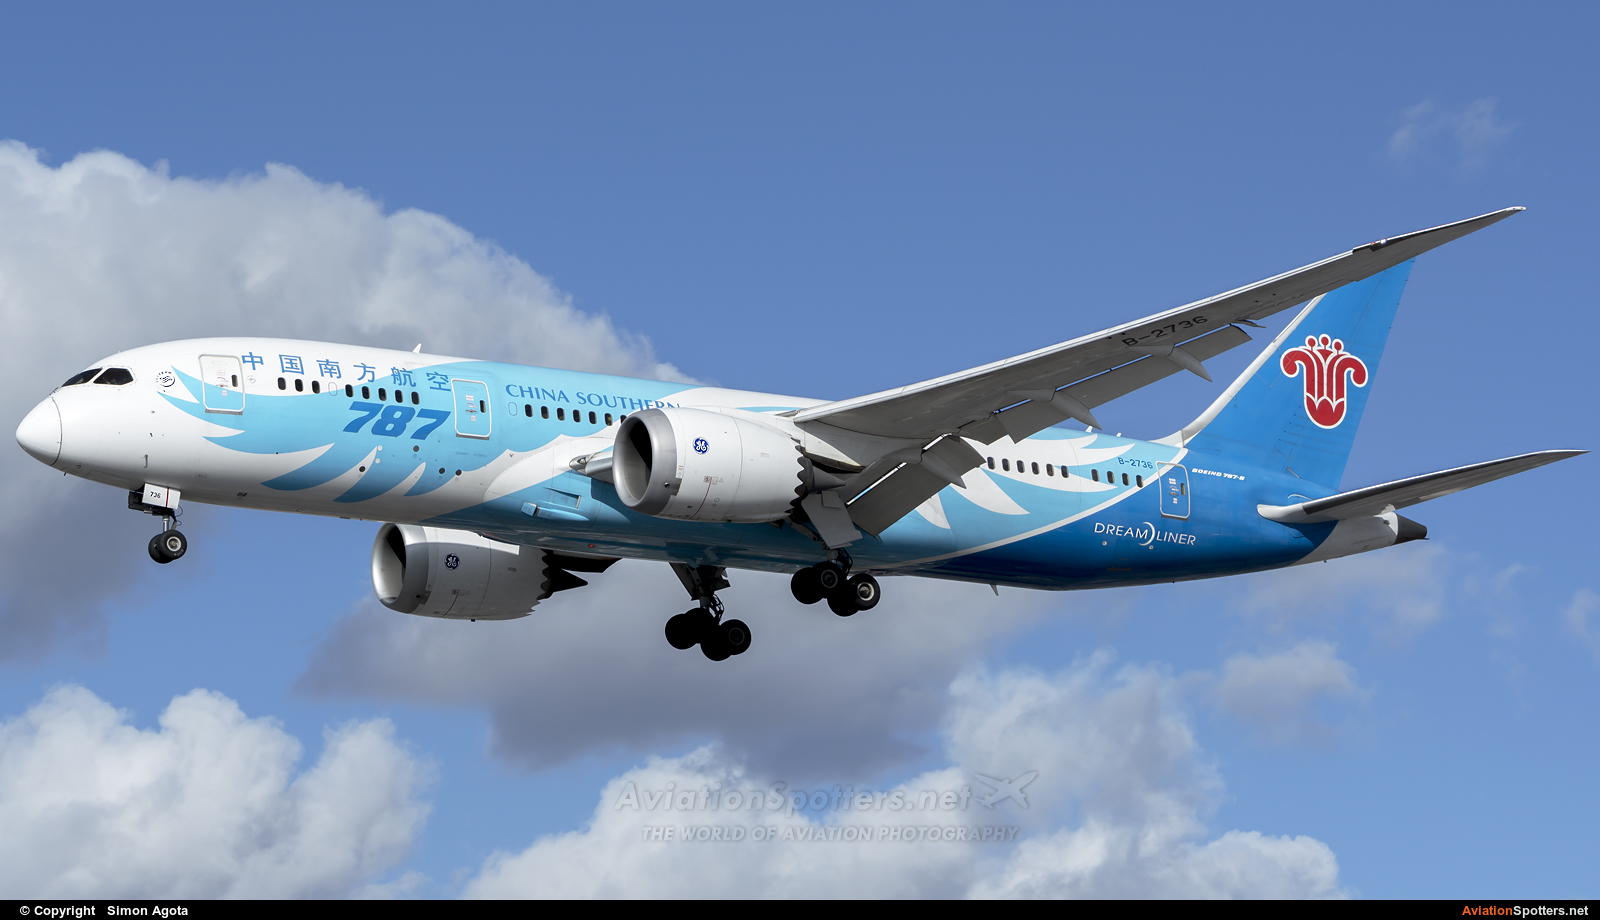 China Southern Airlines  -  787-8 Dreamliner  (B-2736) By Simon Agota (goti80)